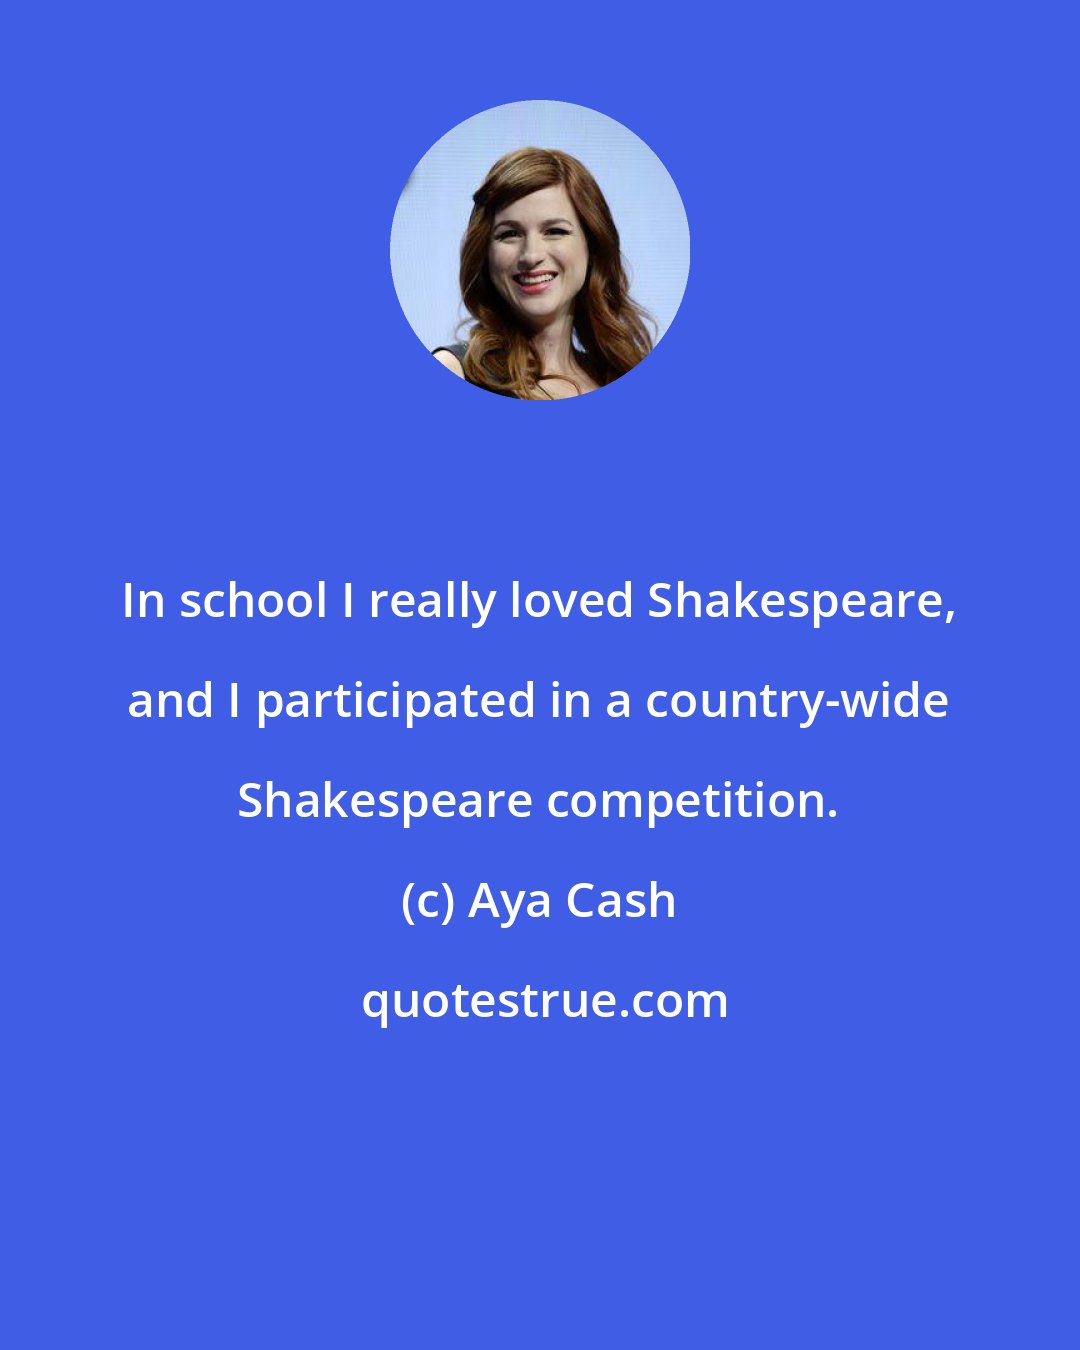 Aya Cash: In school I really loved Shakespeare, and I participated in a country-wide Shakespeare competition.